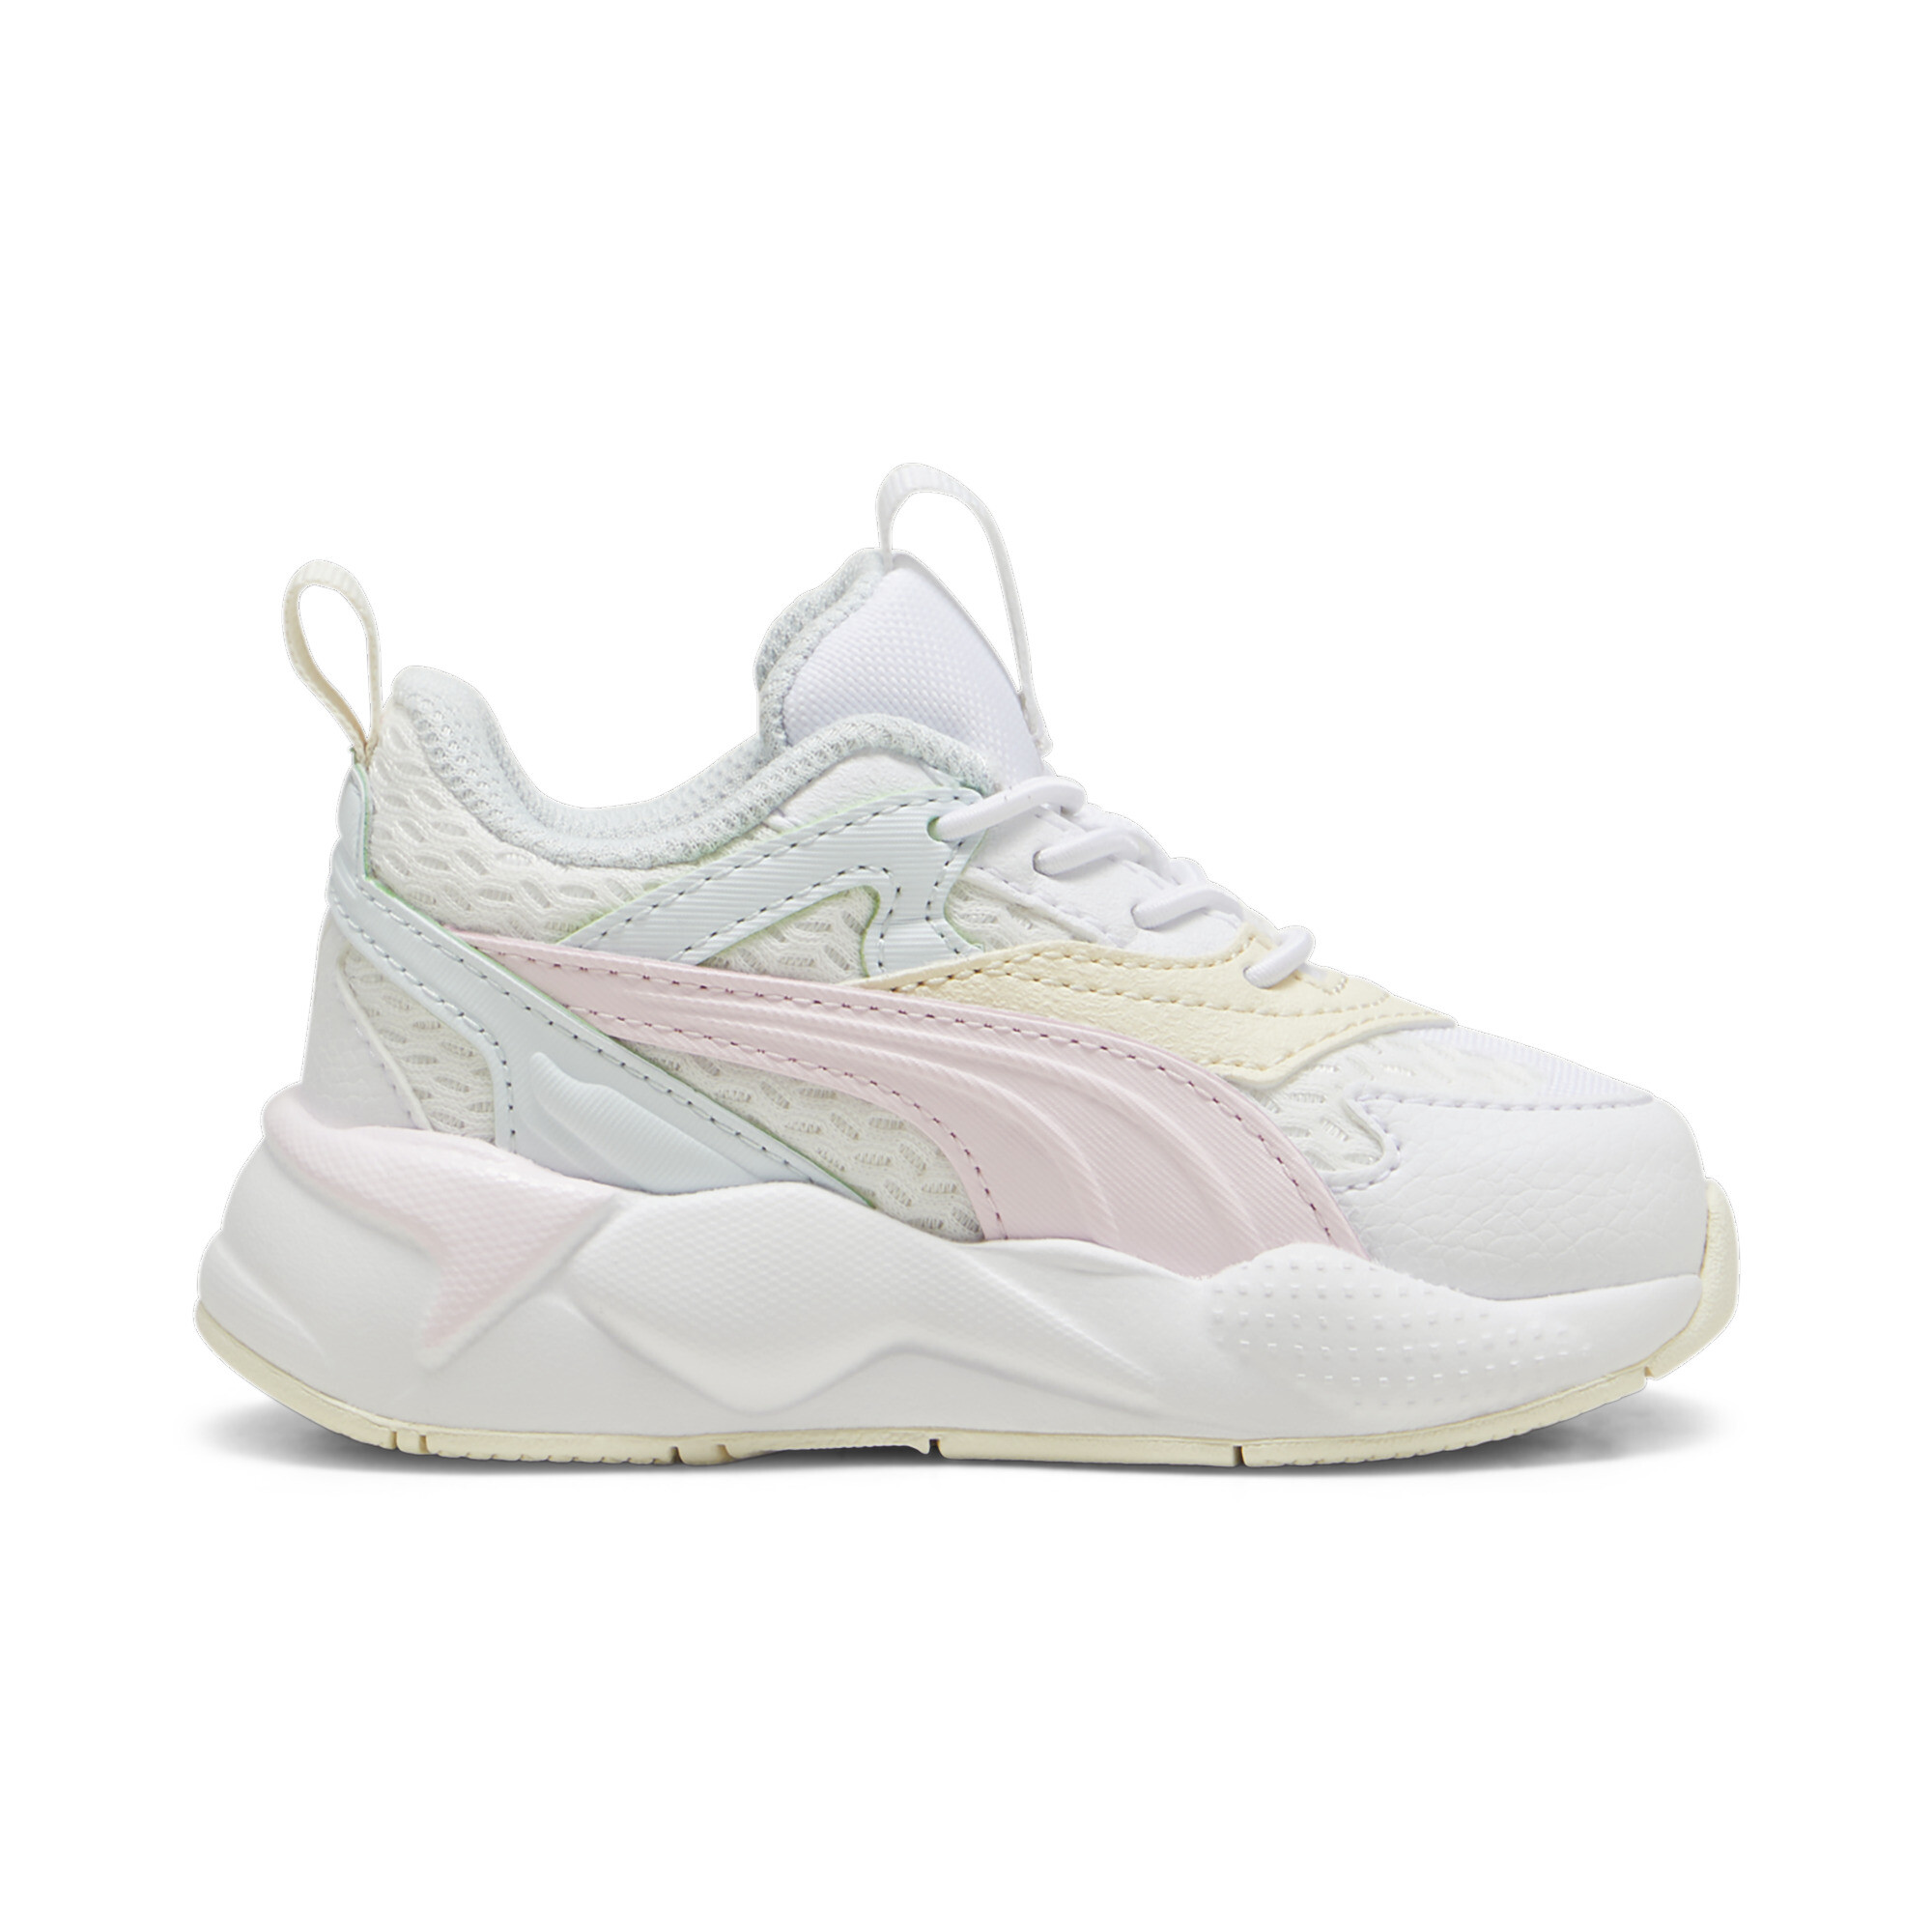 Puma RS-X Efekt Toddlers' Sneakers, White, Size 27, Shoes